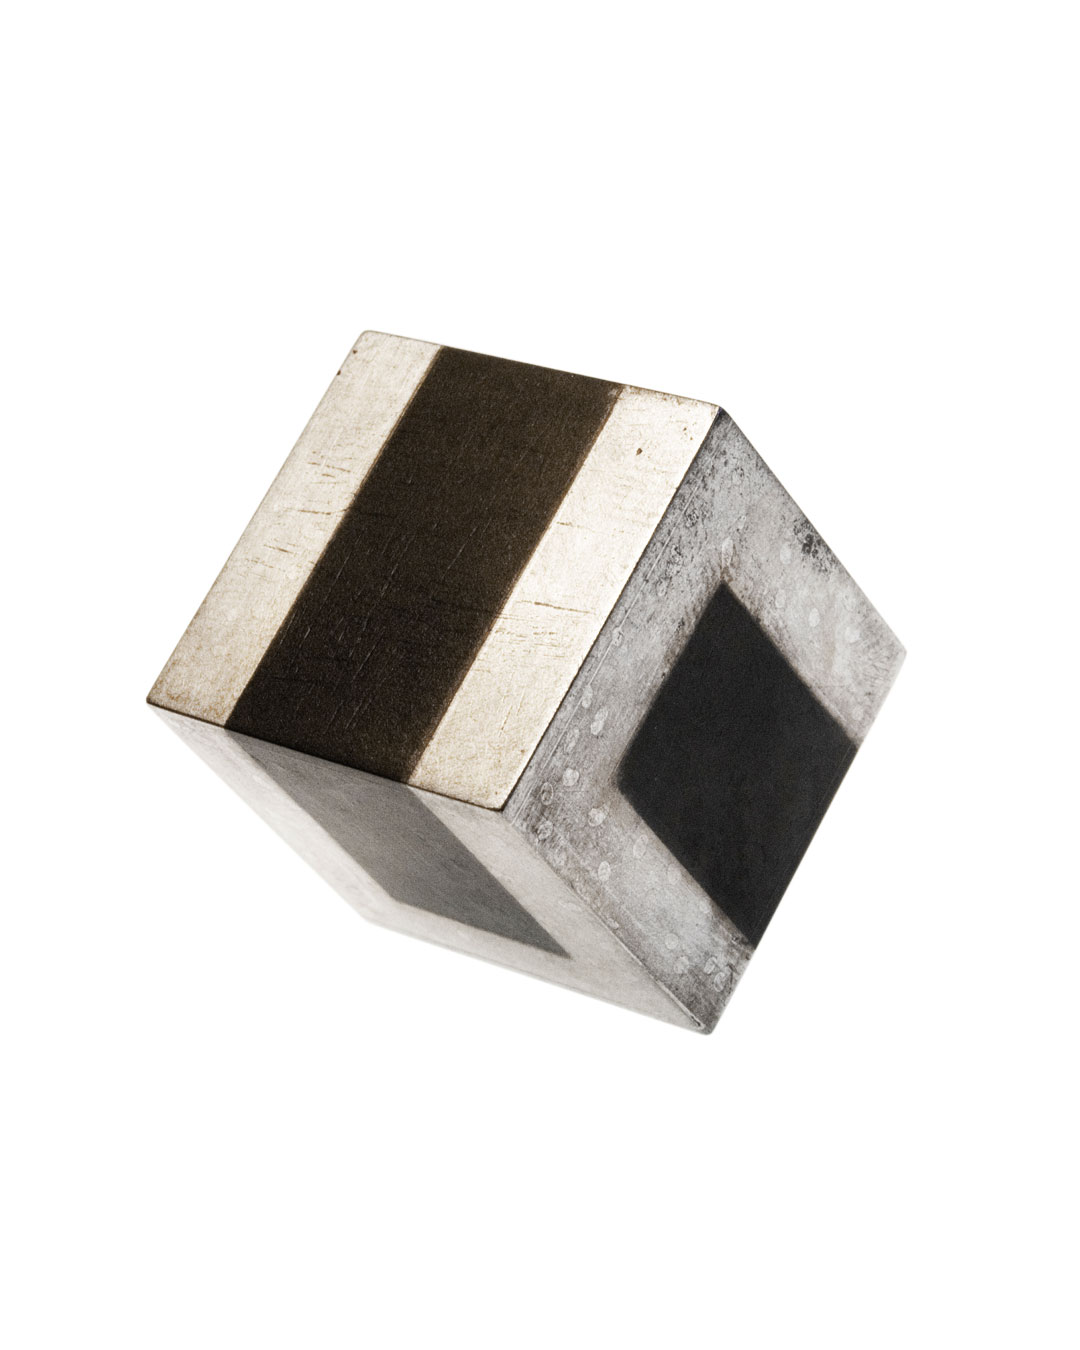 Tore Svensson, Cube, 2008, brooch; etched steel, partly gilt or silver-plated, 20 x 20 x 20 mm, €425